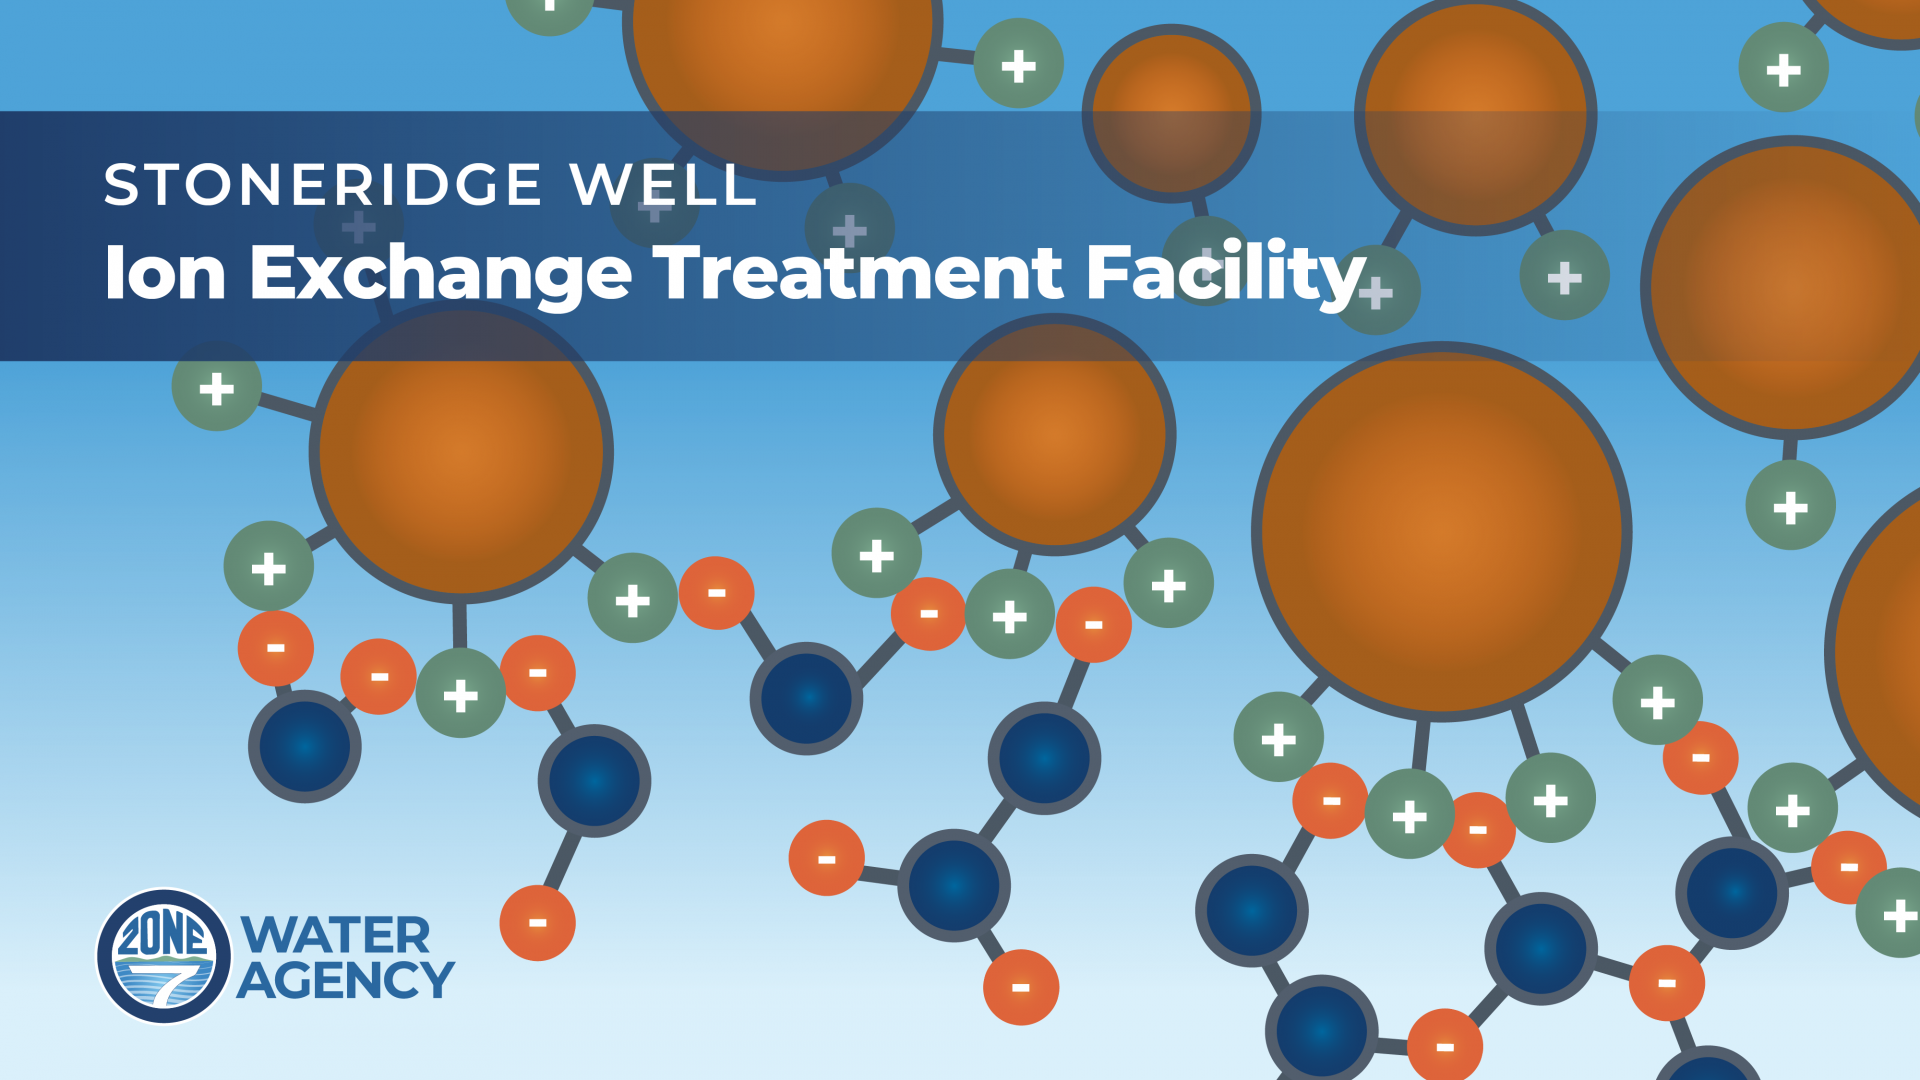 Dive into the Wondrous World of Water and learn about our new Ion Exchange PFAS Treatment Facility